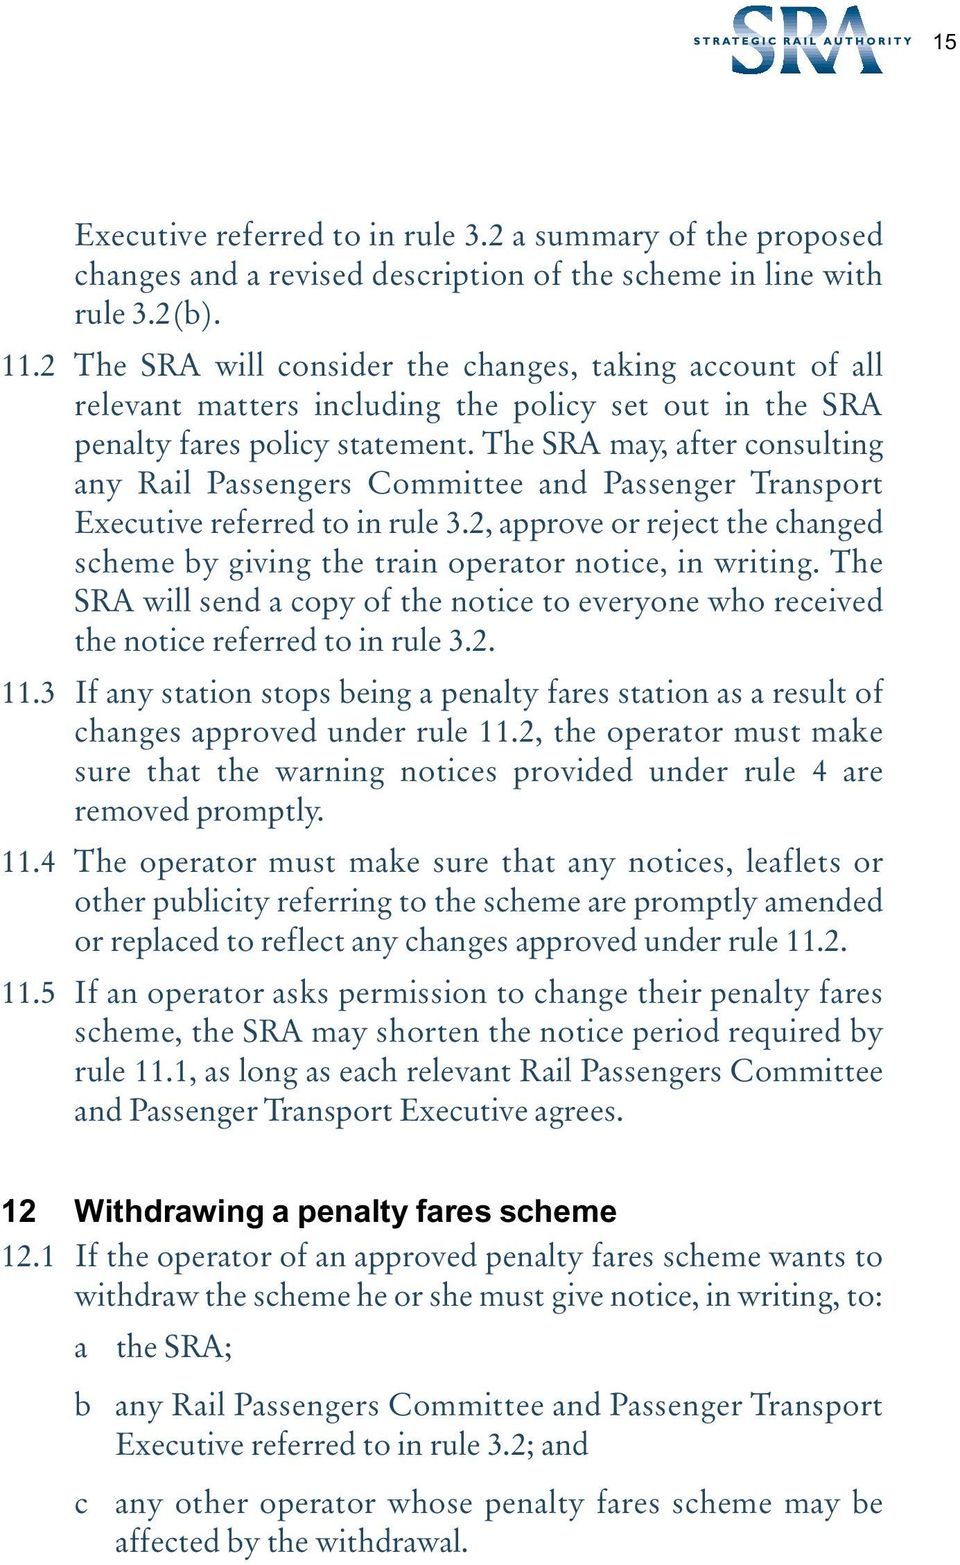 The SRA may, after consulting any Rail Passengers Committee and Passenger Transport Executive referred to in rule 3.